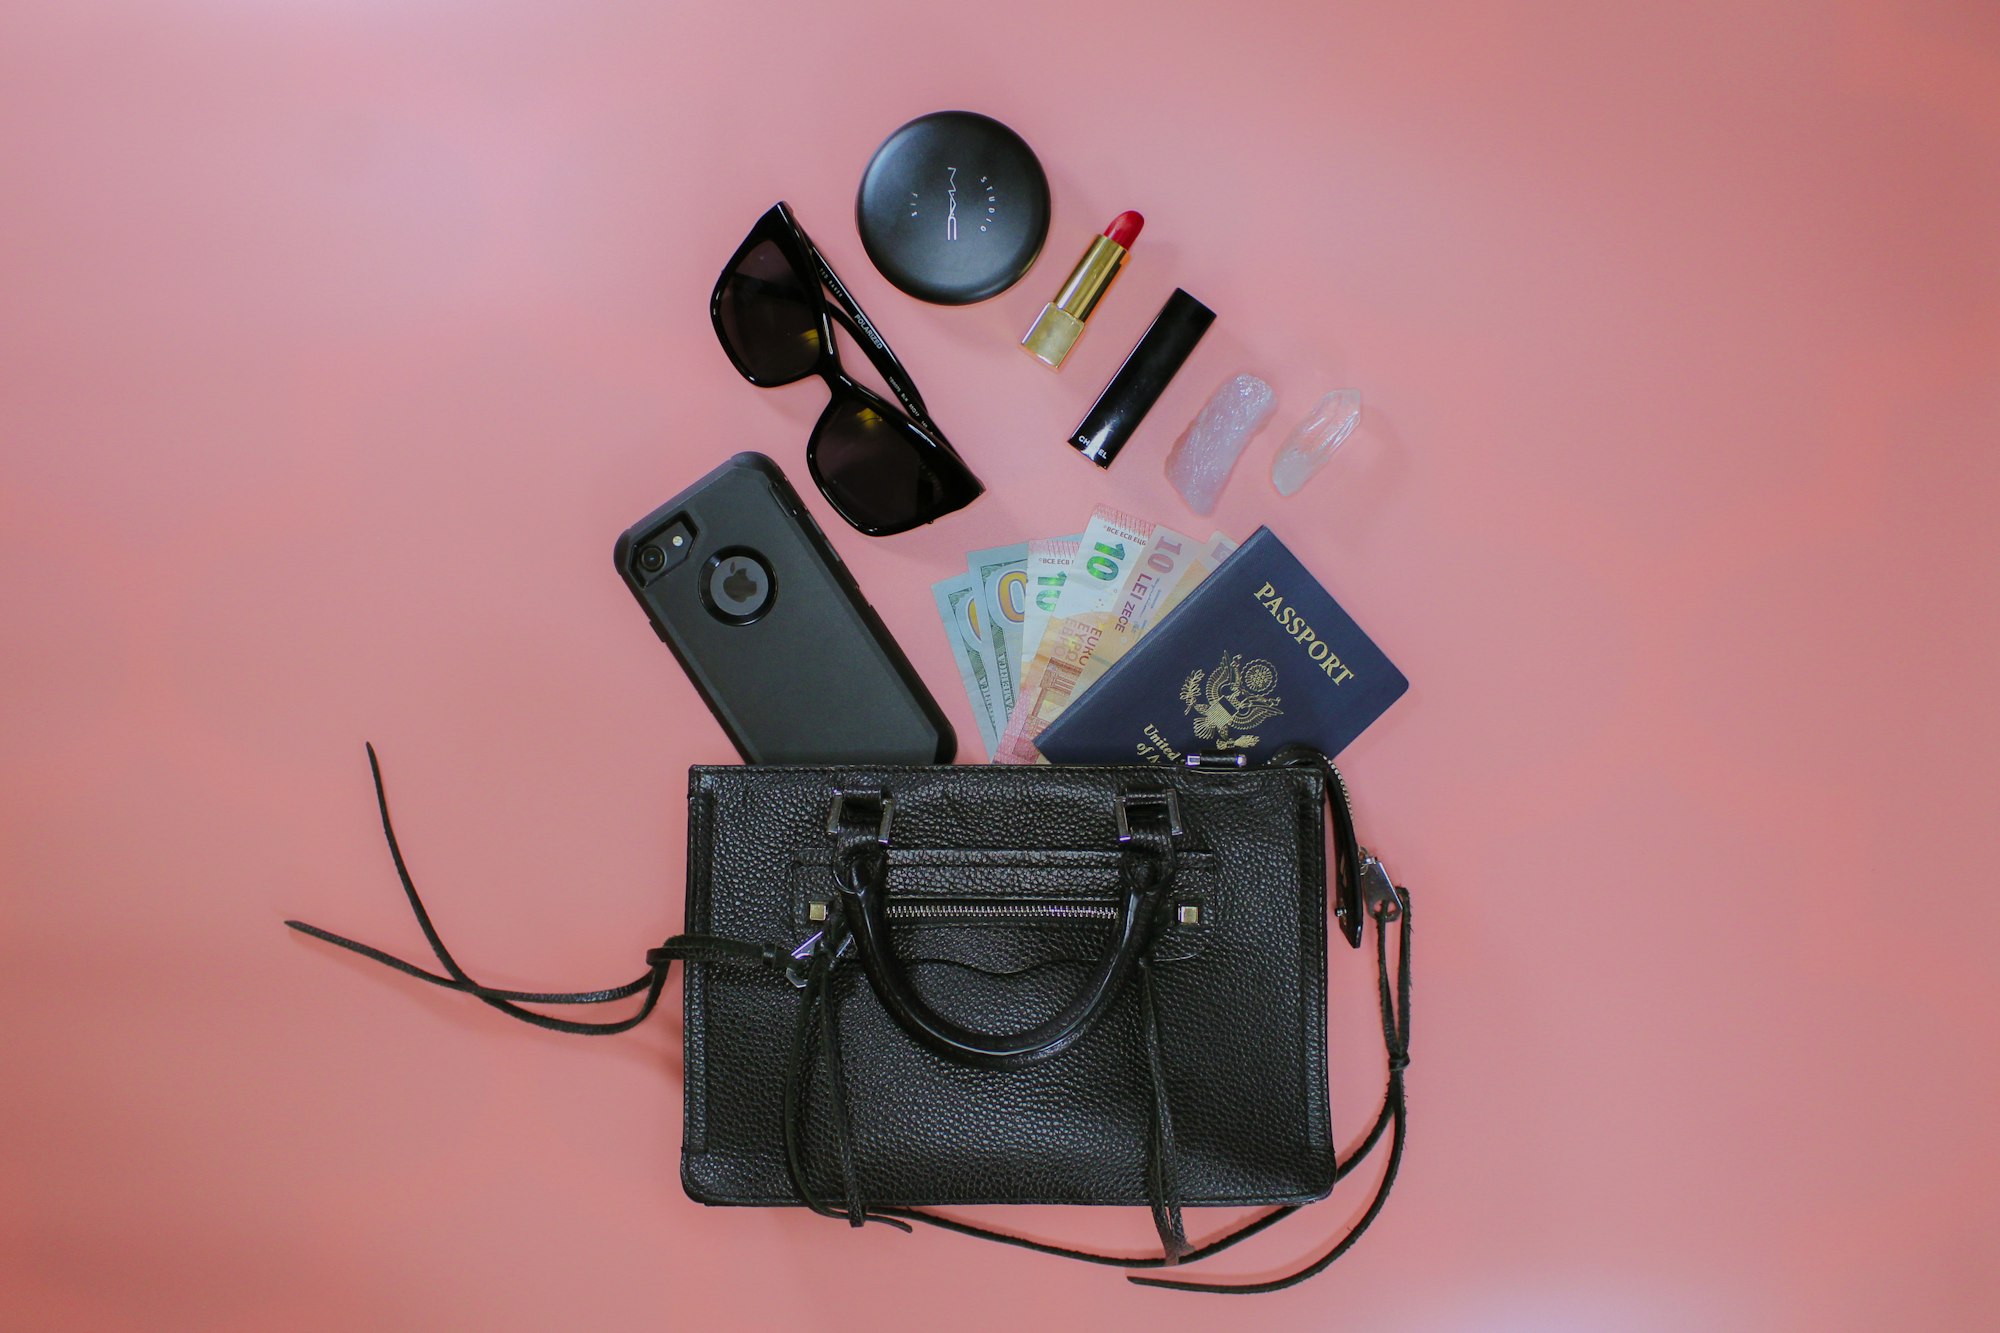 Flat lay featuring makeup and beauty items of a female traveler.
